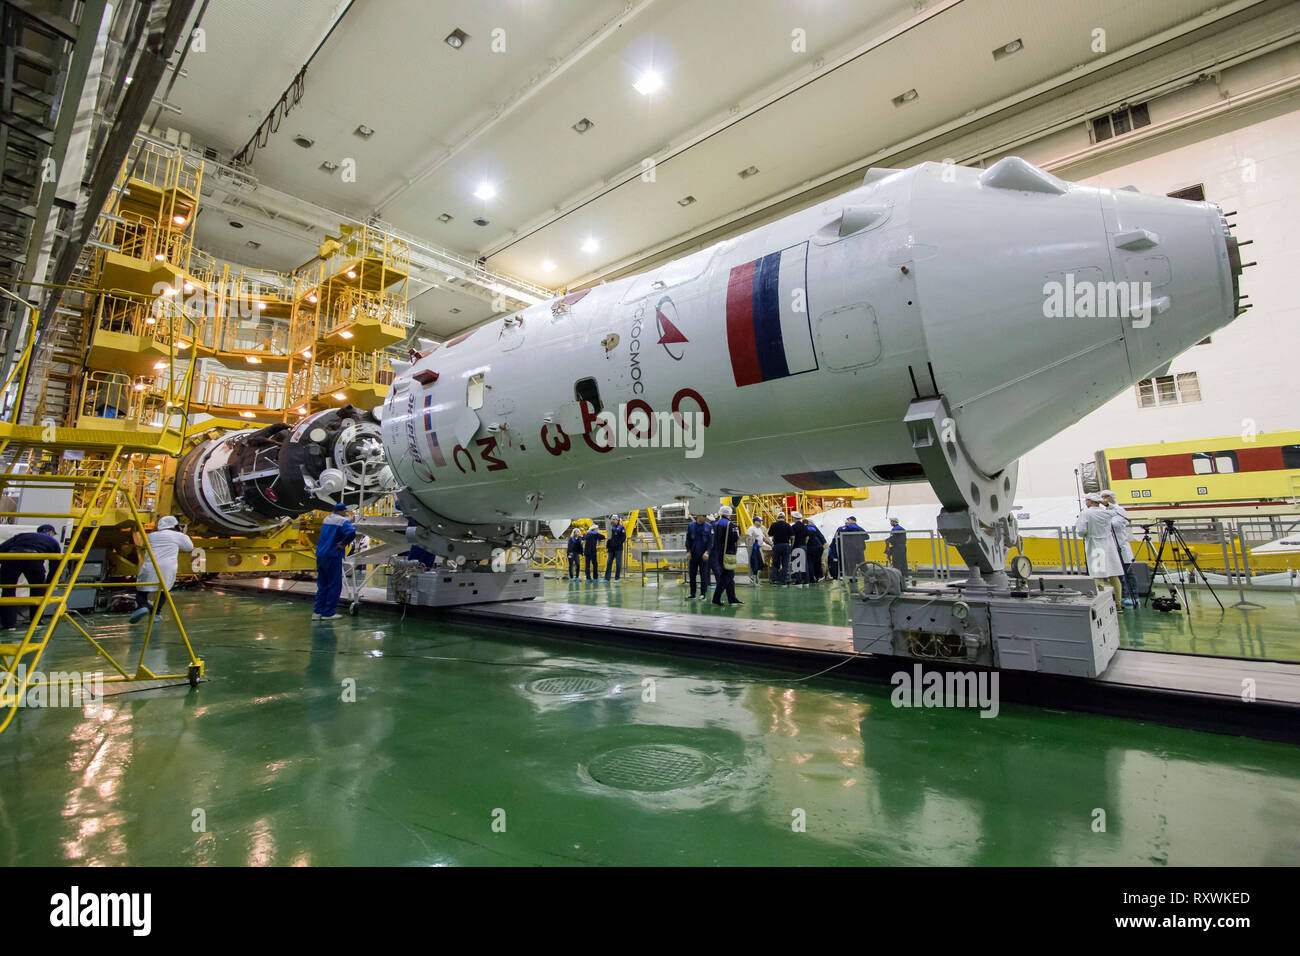 The Russian Soyuz MS-12 spacecraft is encapsulation into the nose fairing of the booster rocket in the Integration Building at the Baikonur Cosmodrome March 6, 2019 in Baikonur, Kazakhstan. The Expedition 59 crew: Nick Hague and Christina Koch of NASA and Alexey Ovchinin of Roscosmos will launch March 14th for a six-and-a-half month mission on the International Space Station. Stock Photo